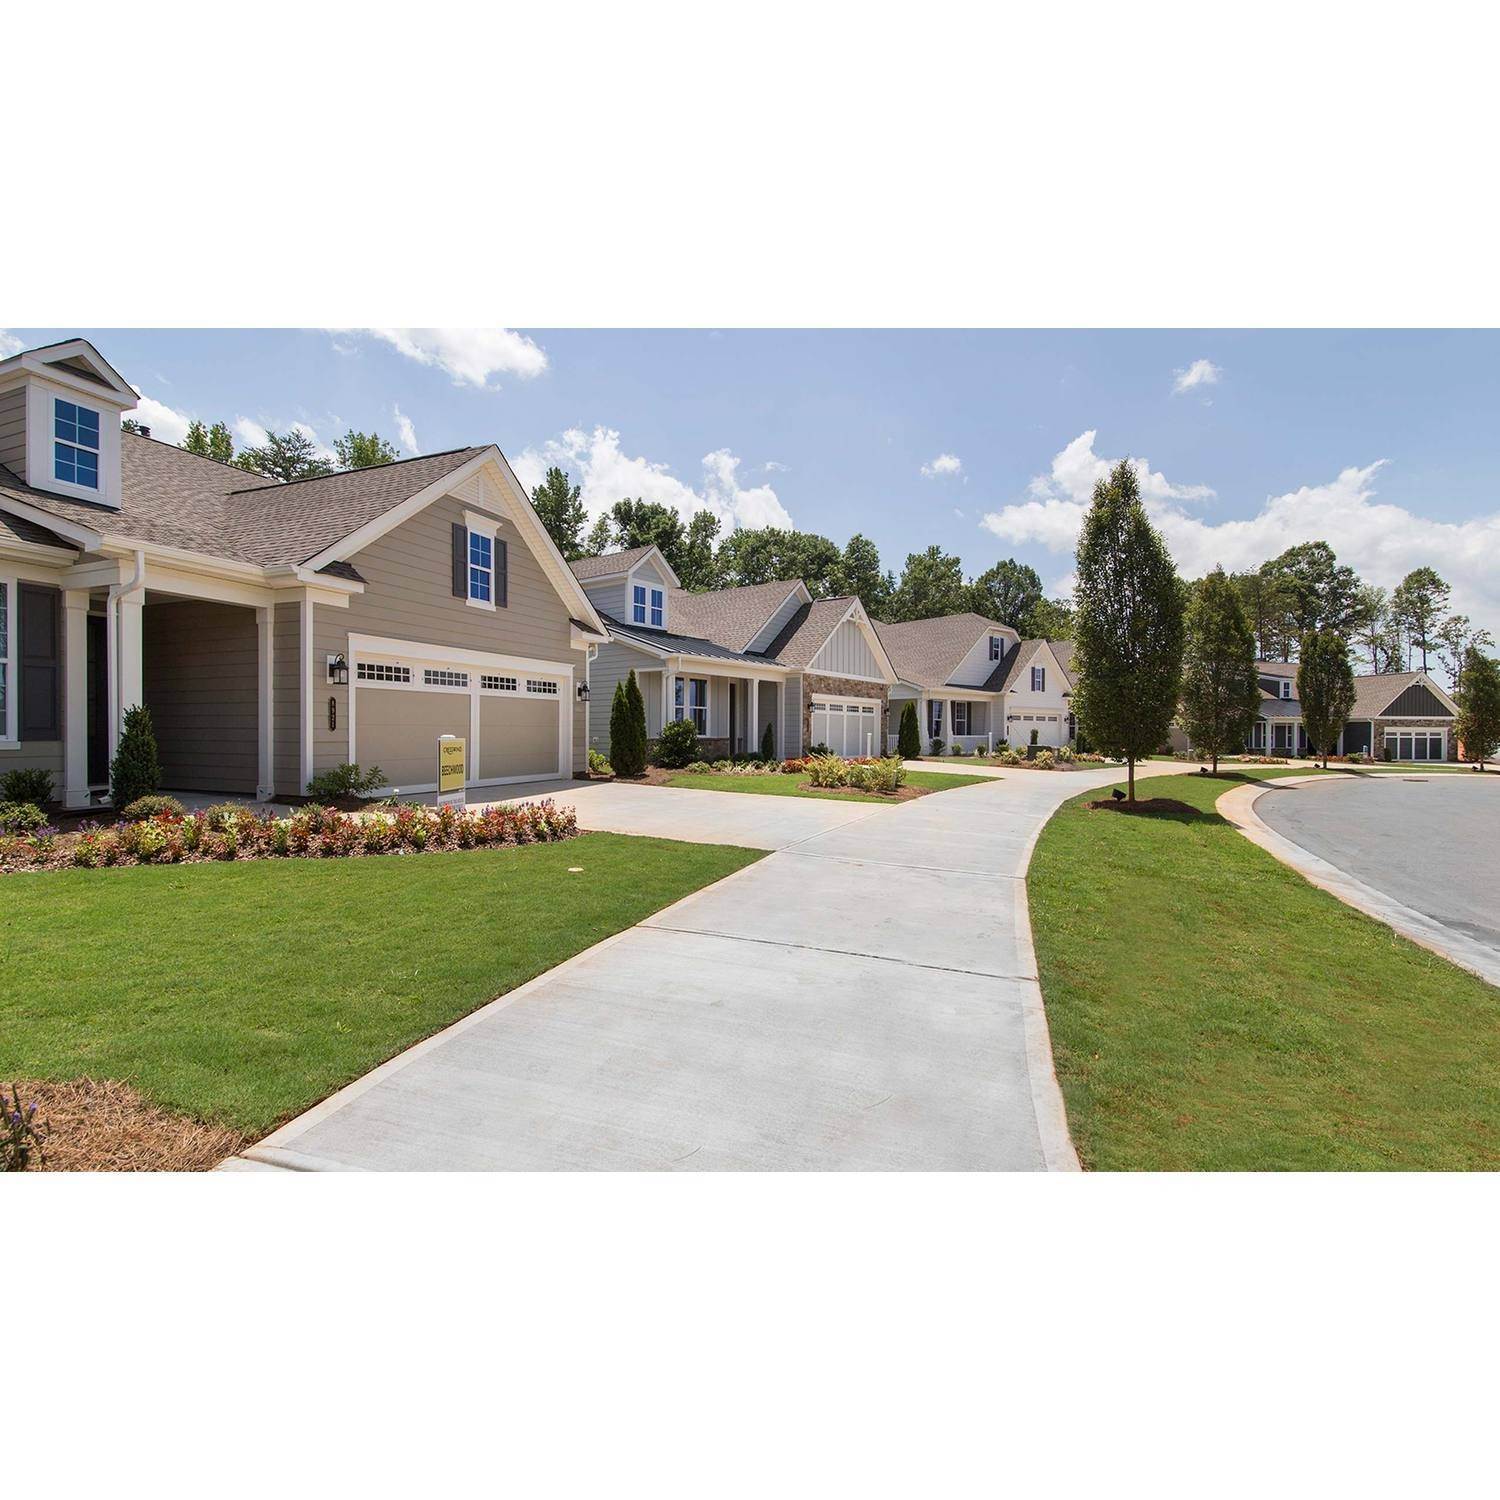 19. Cresswind Charlotte building at 8913 Silver Springs Court, Charlotte, NC 28215